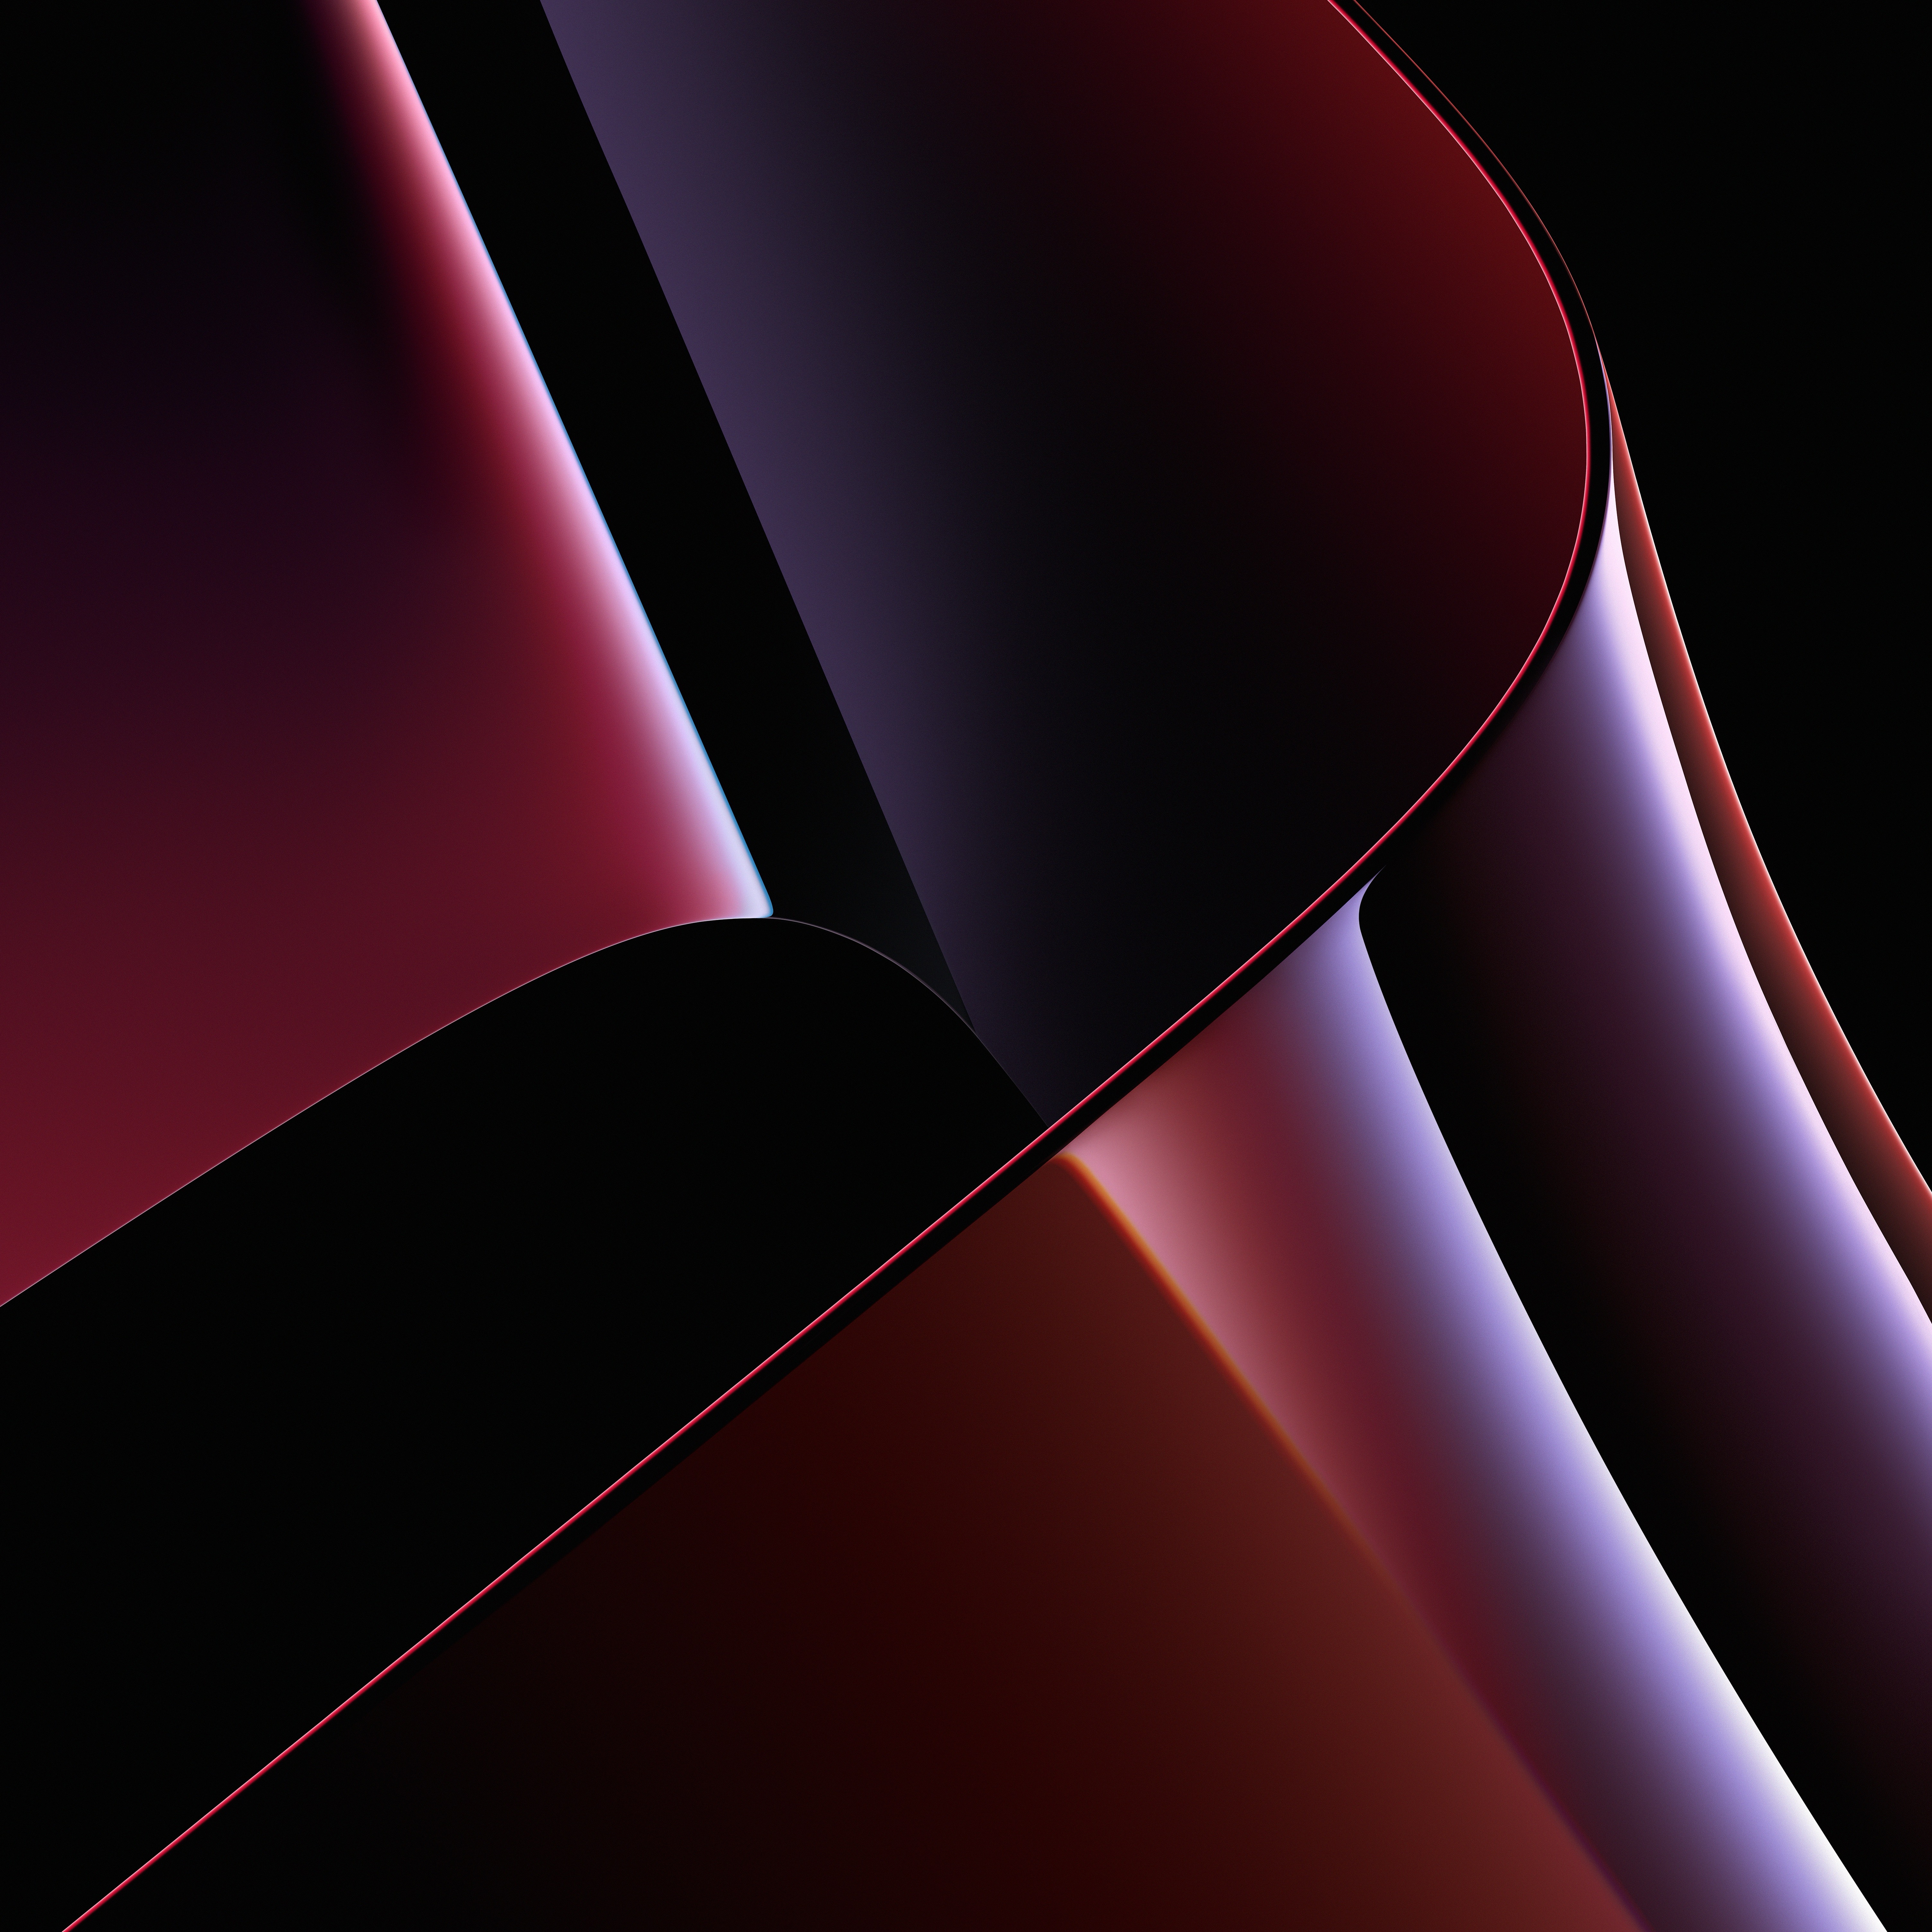 New 2021 MacBook Pro (Chroma-Red Dark) Stock Wallpaper in Ultra HD -  Wallpapers Central